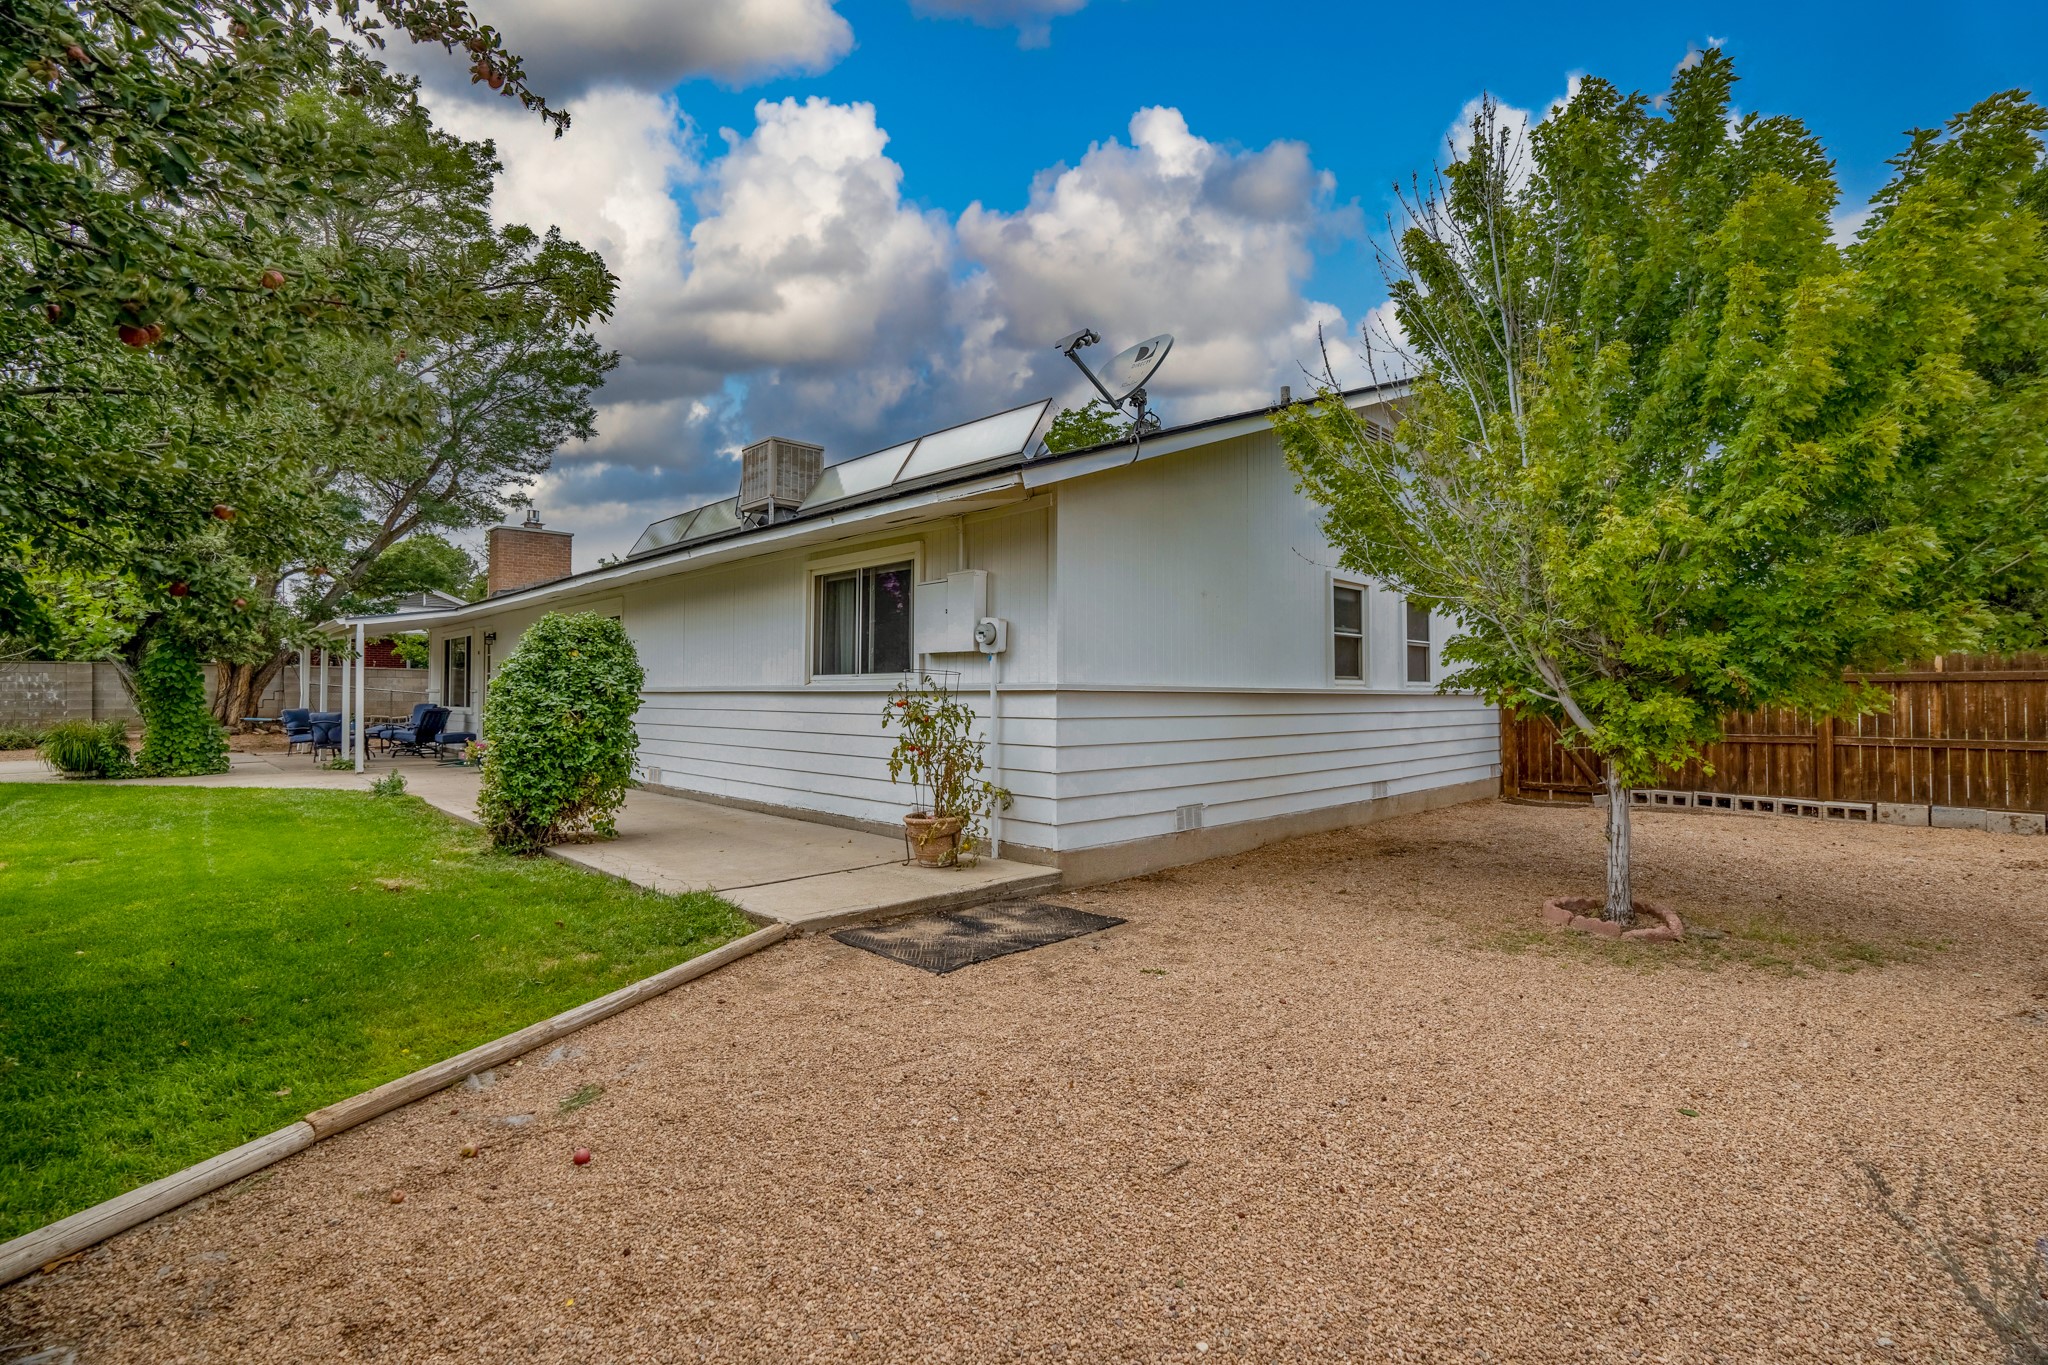 127 Grand Canyon Drive, White Rock, New Mexico 87547, 4 Bedrooms Bedrooms, ,2 BathroomsBathrooms,Residential,For Sale,127 Grand Canyon Drive,202232710